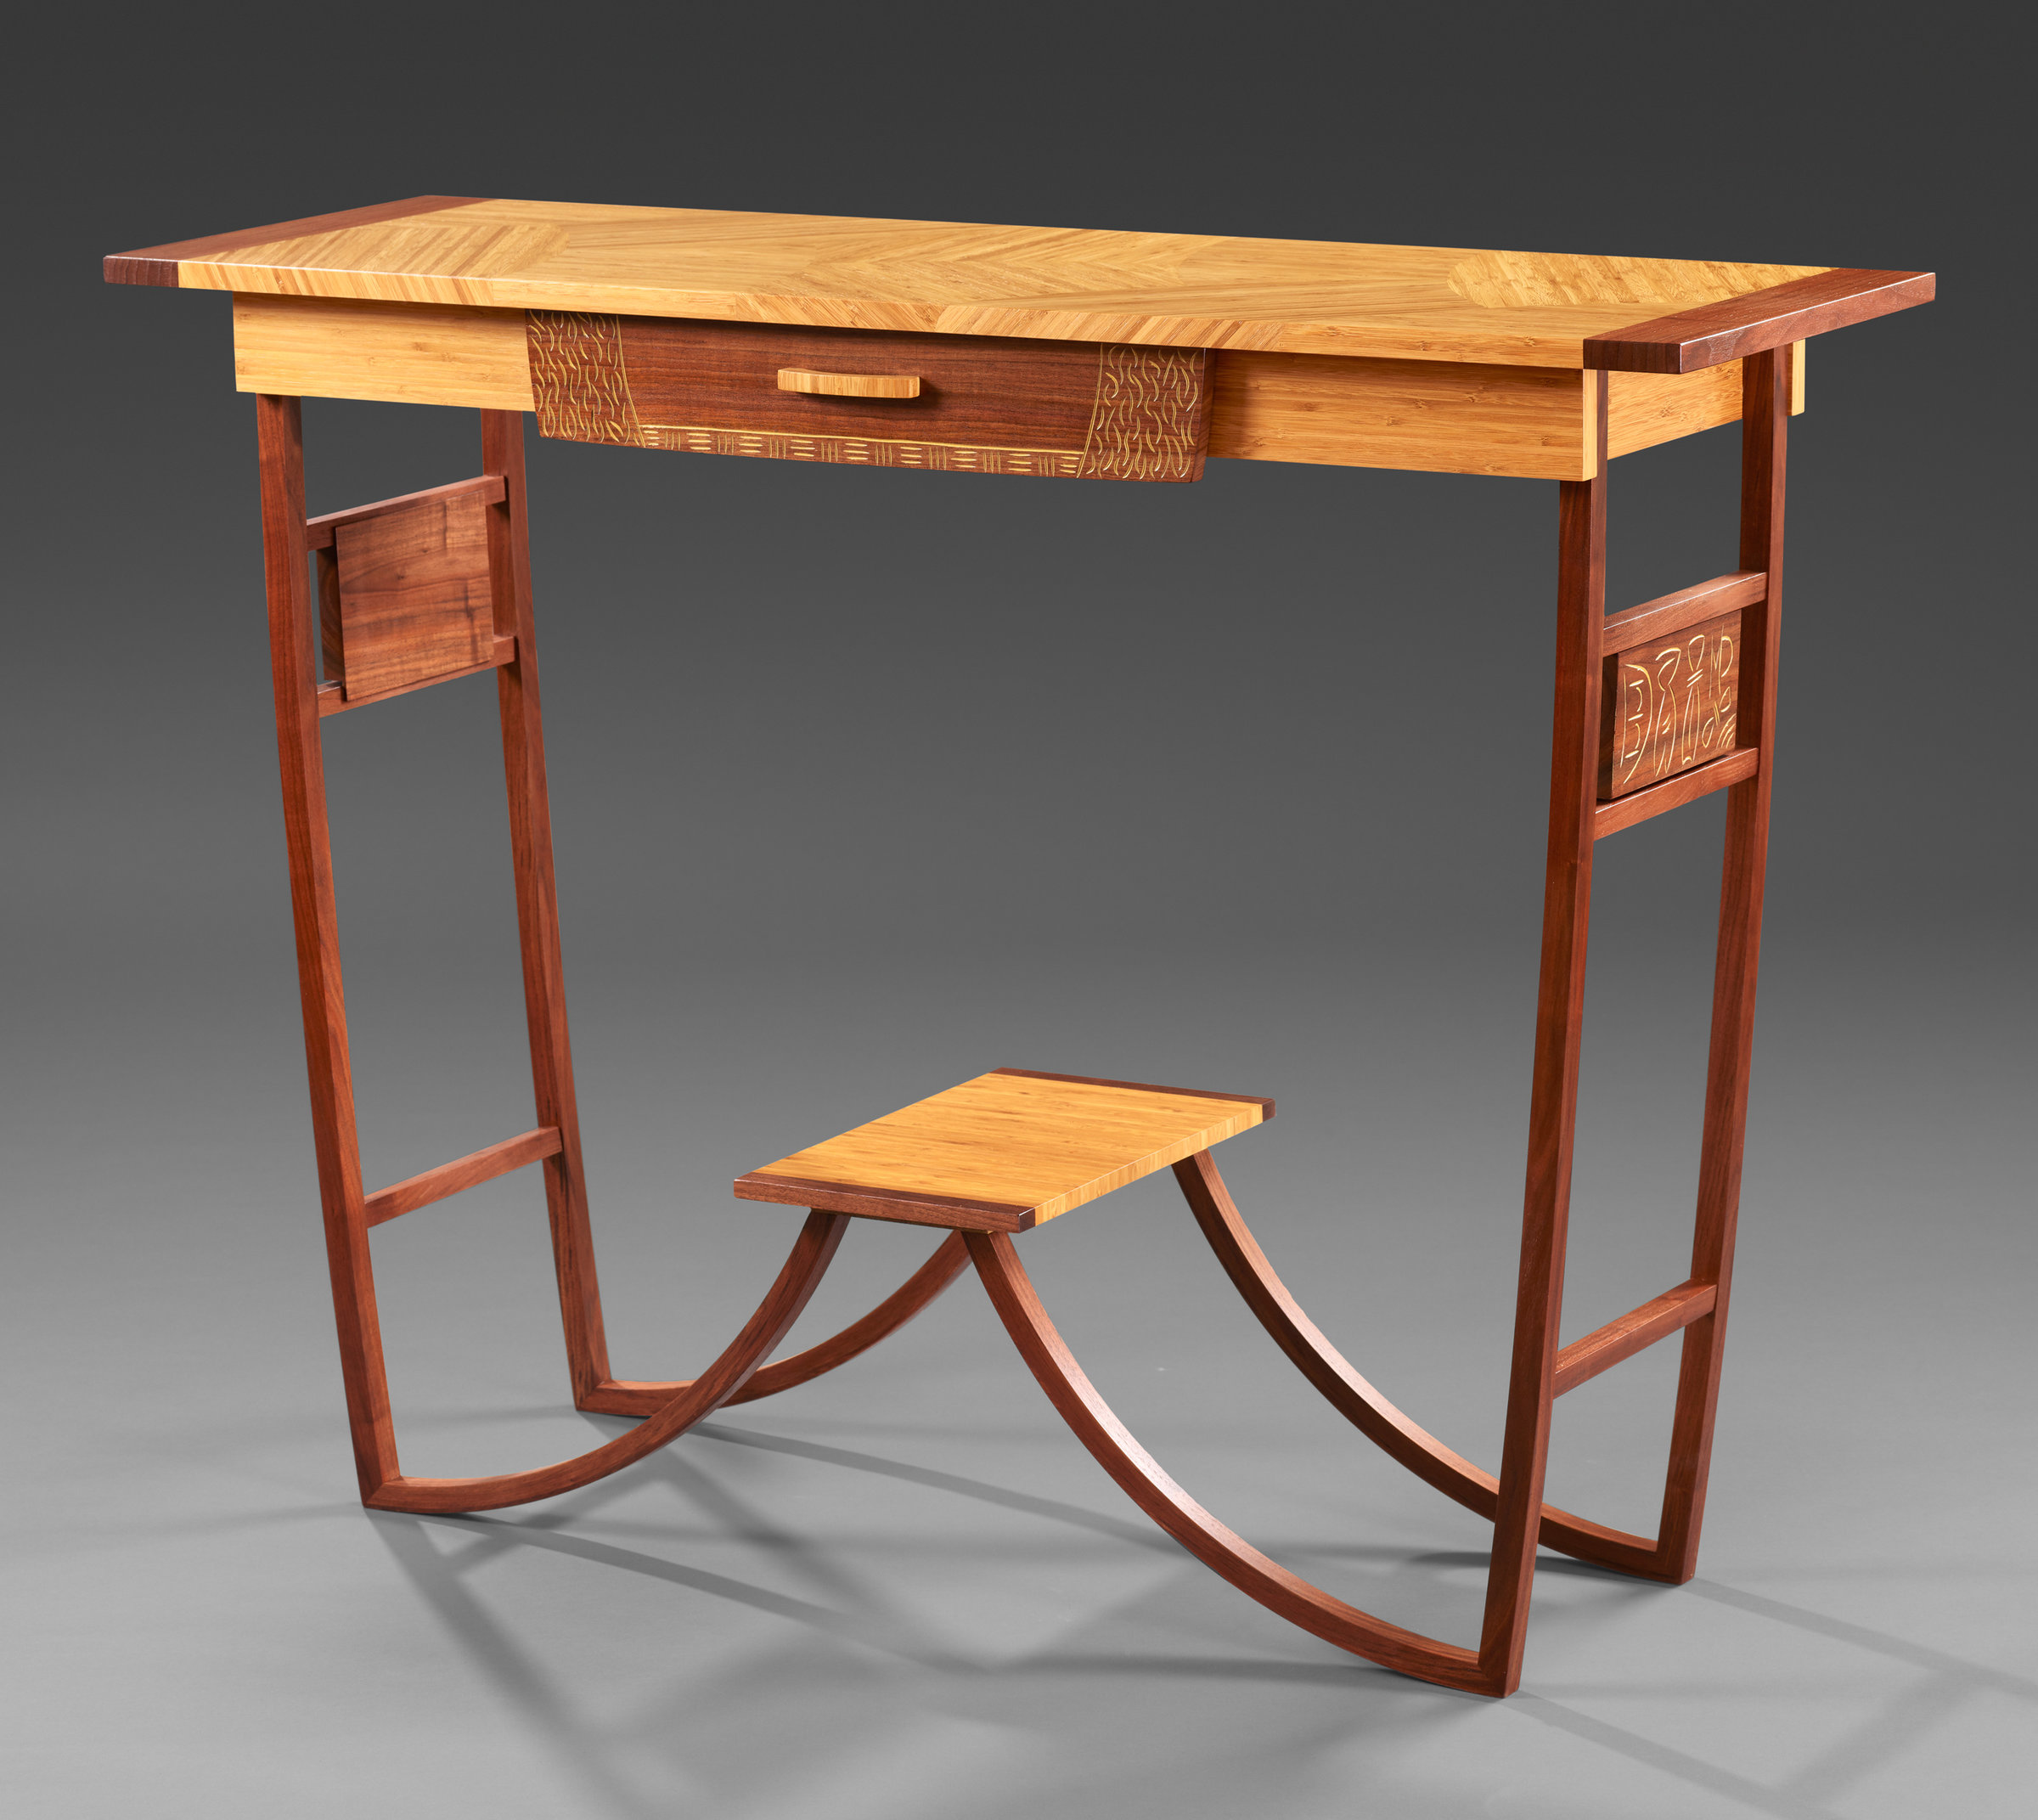 Bamboo Walnut Entryway Table By Mark Del Guidice Wood Console